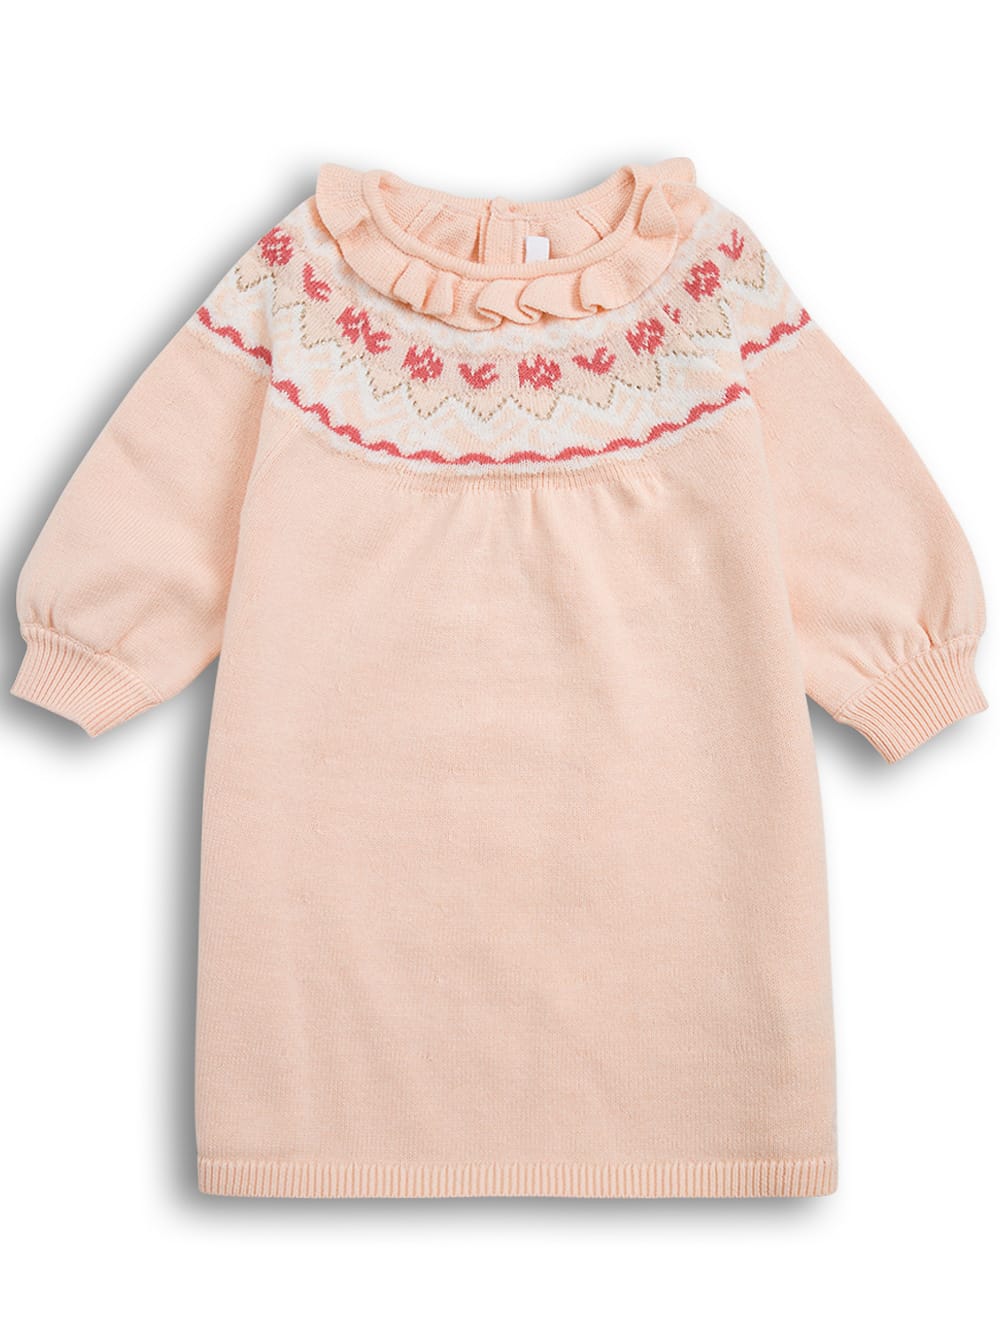 Chloé Pink Cotton Blend Dress With Embroidered Detail